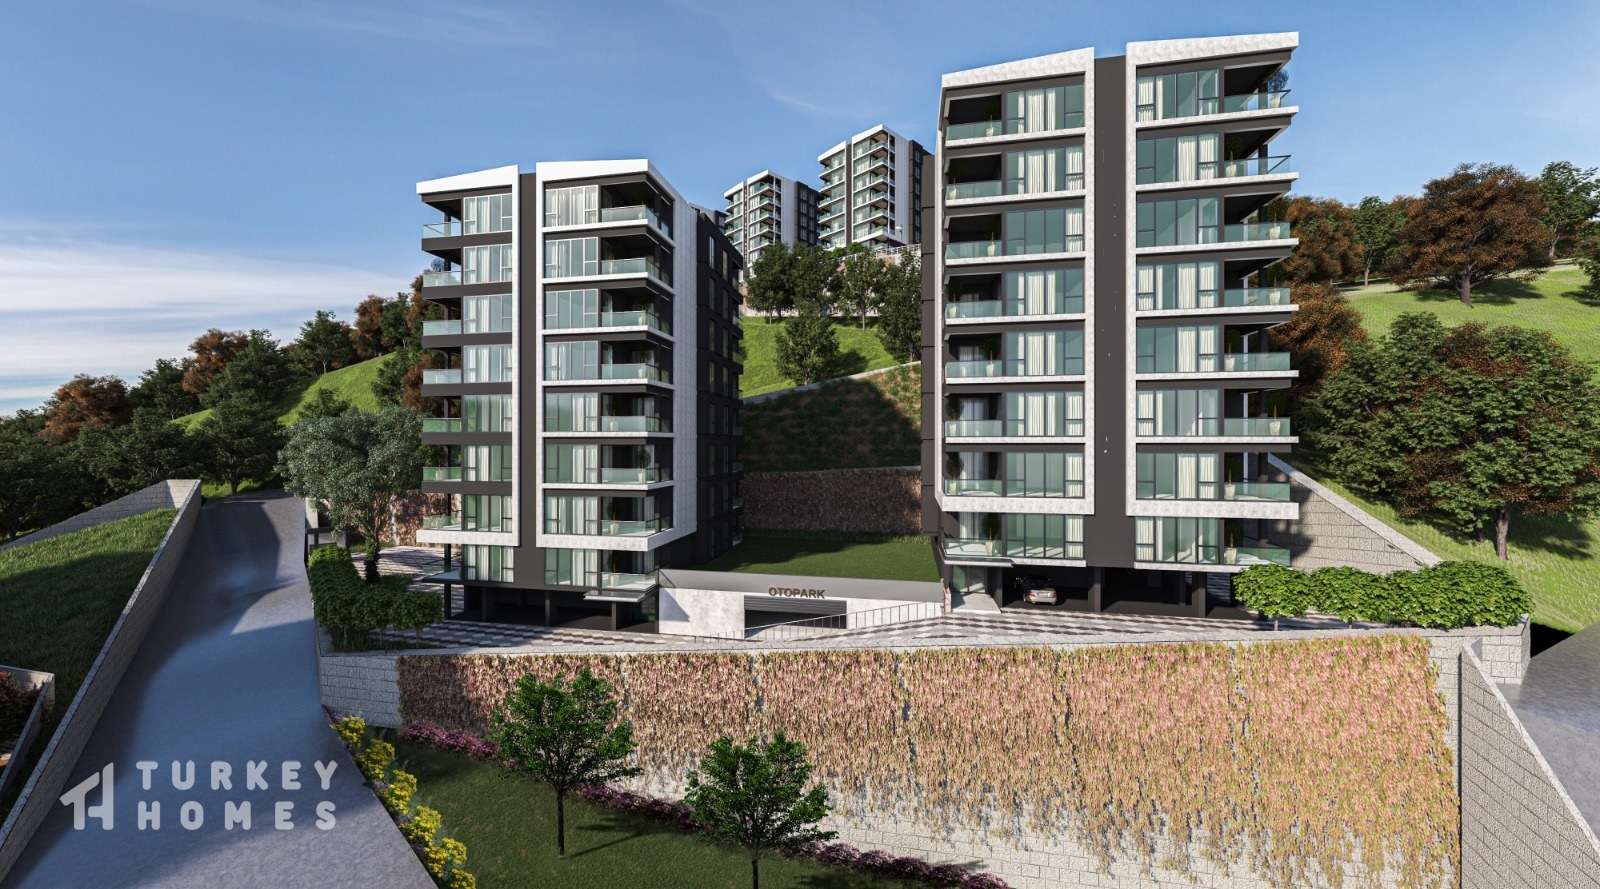 Affordable Trabzon Sea View Apartments - Modern secure complex